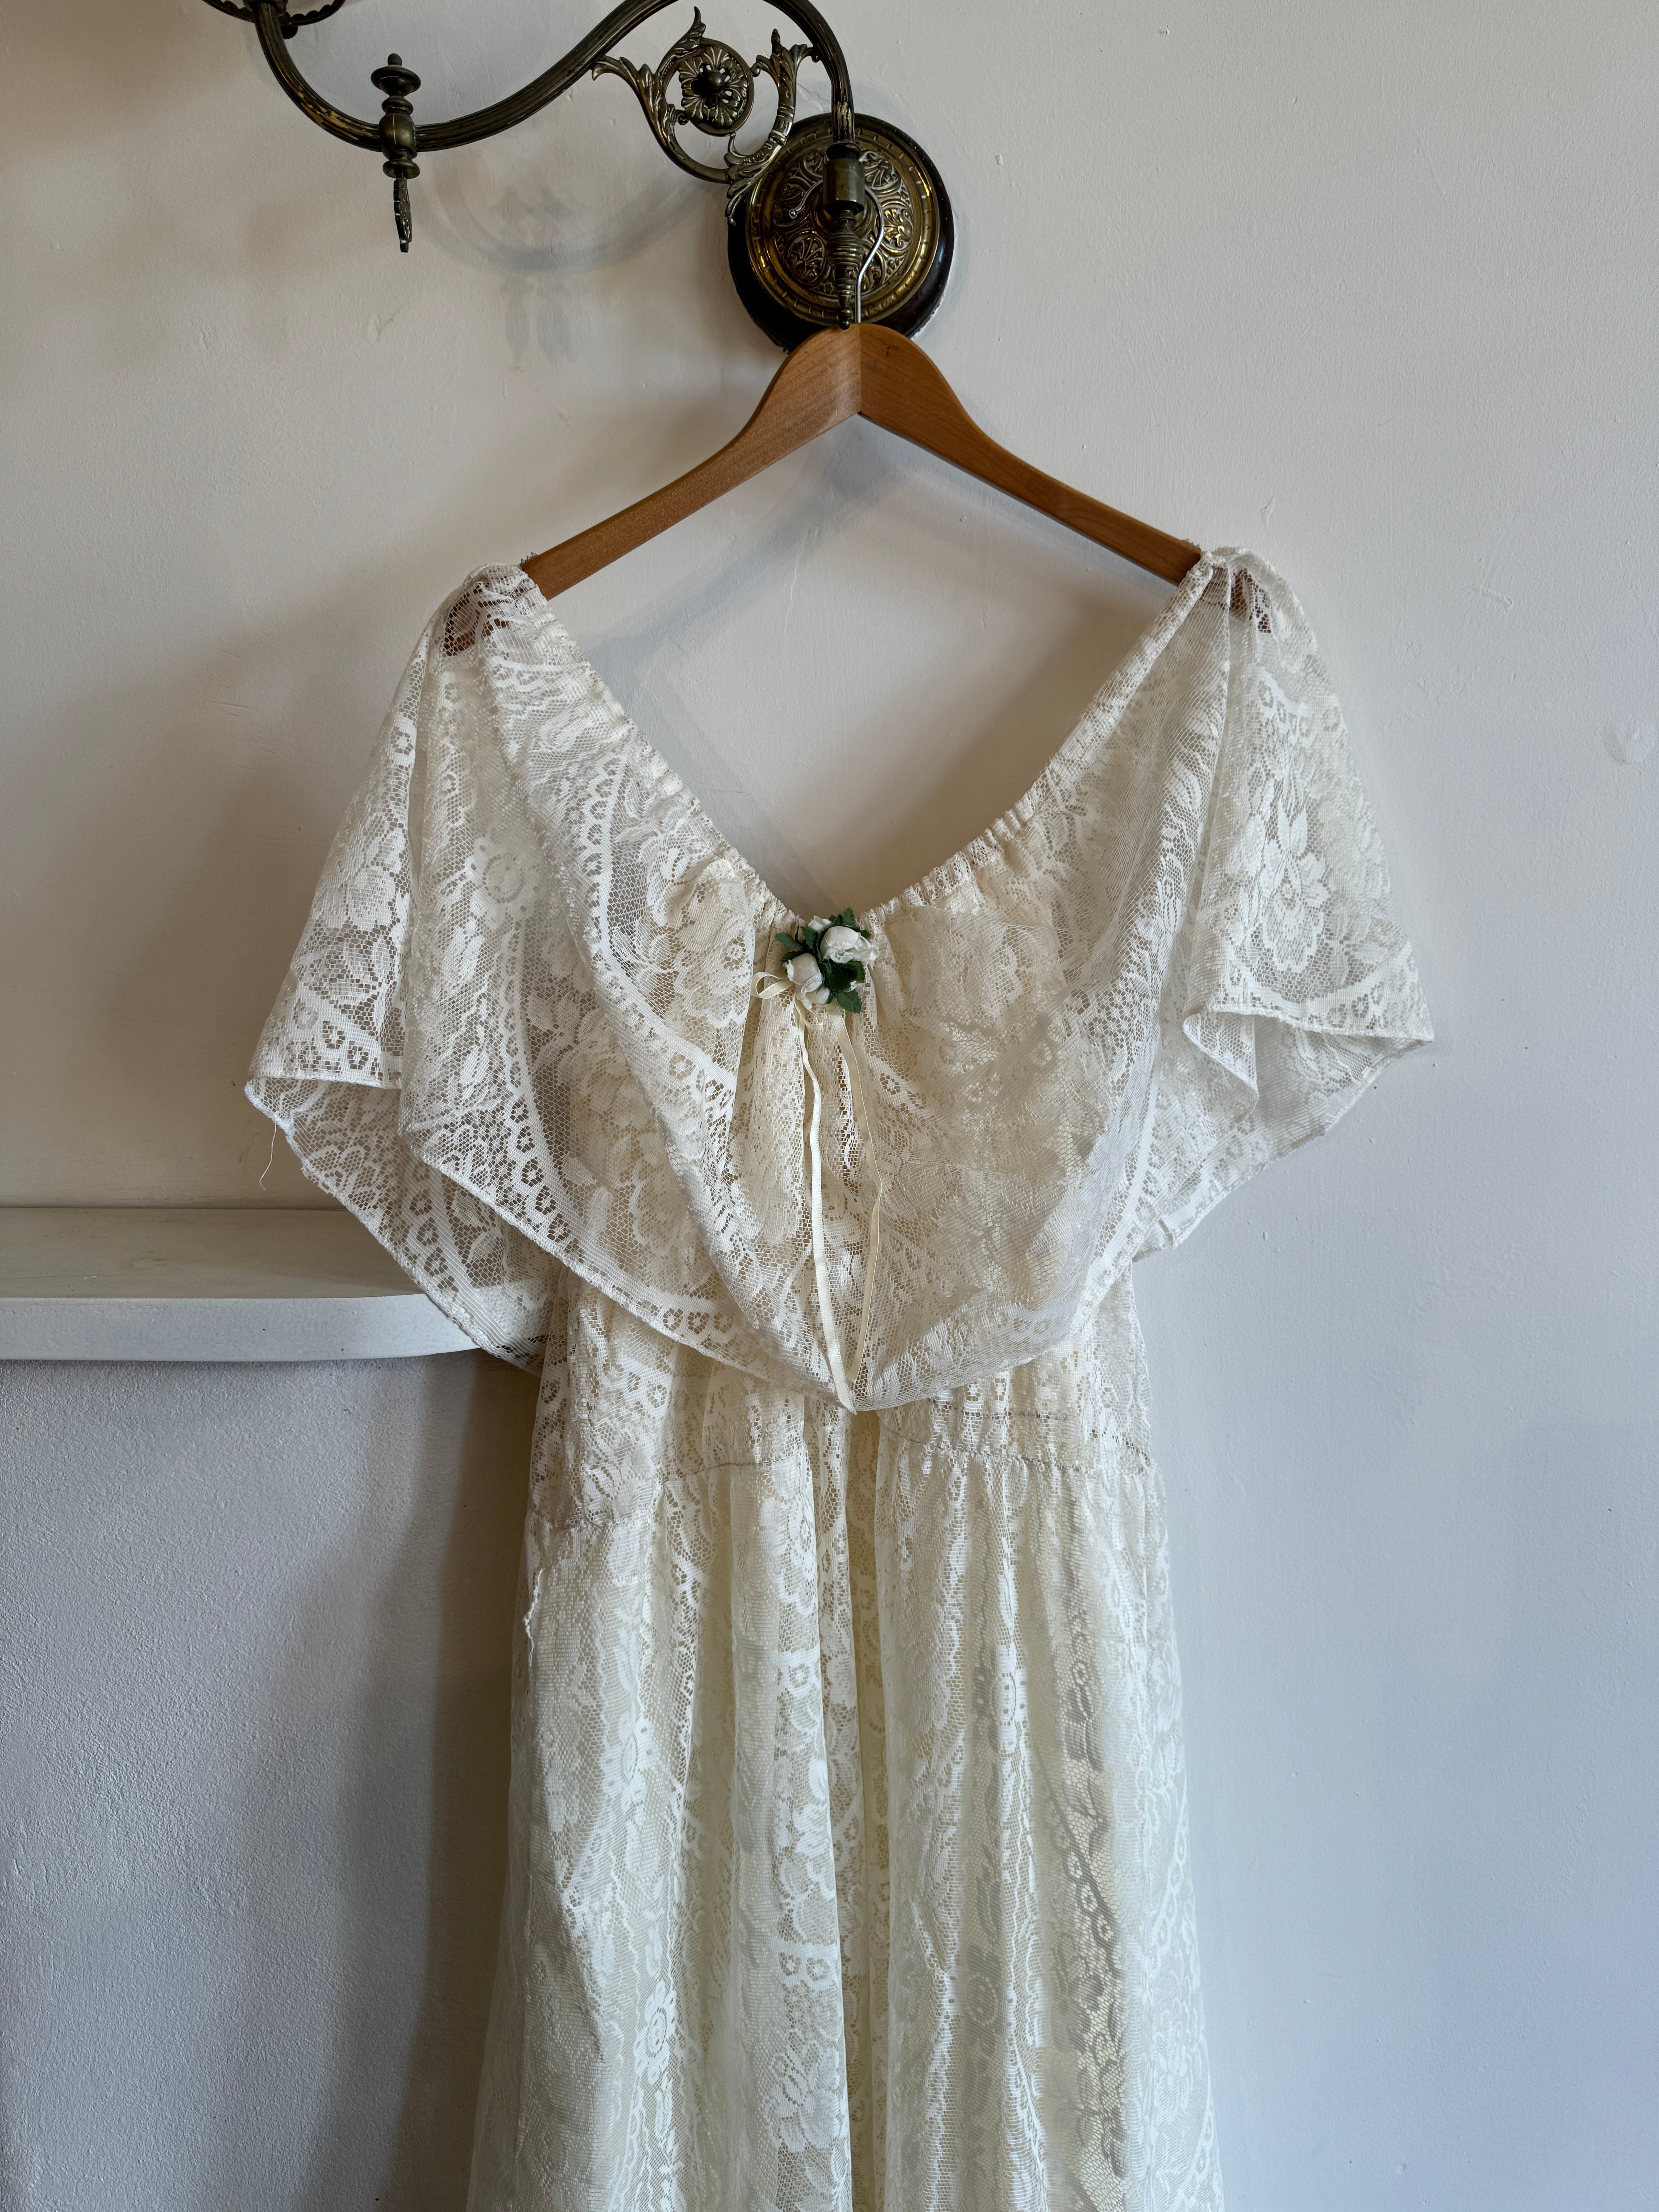 Vintage Lace Frilled Maxi Dress with Rose Applique